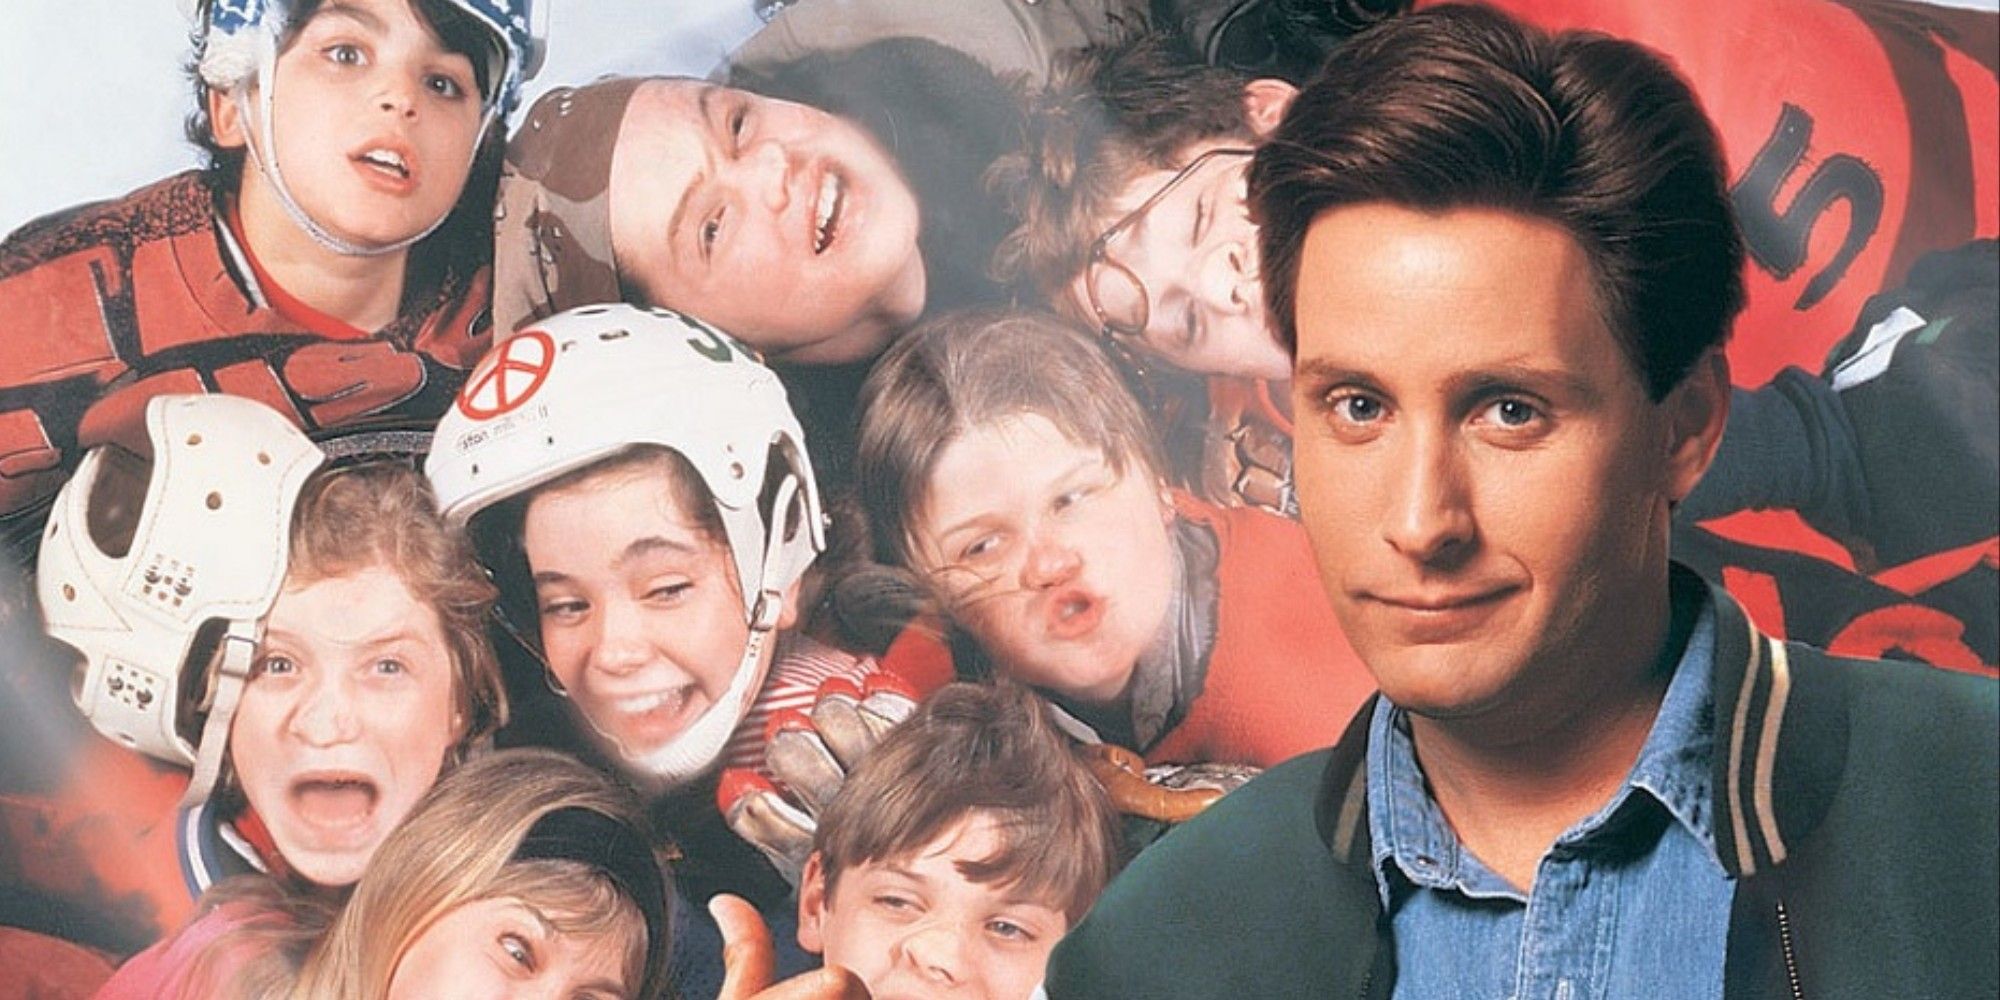 The Mighty Ducks 1992 poster with Emilio Estevez in the foreground and several actors who make up the hockey team pressed up against the glass behind him